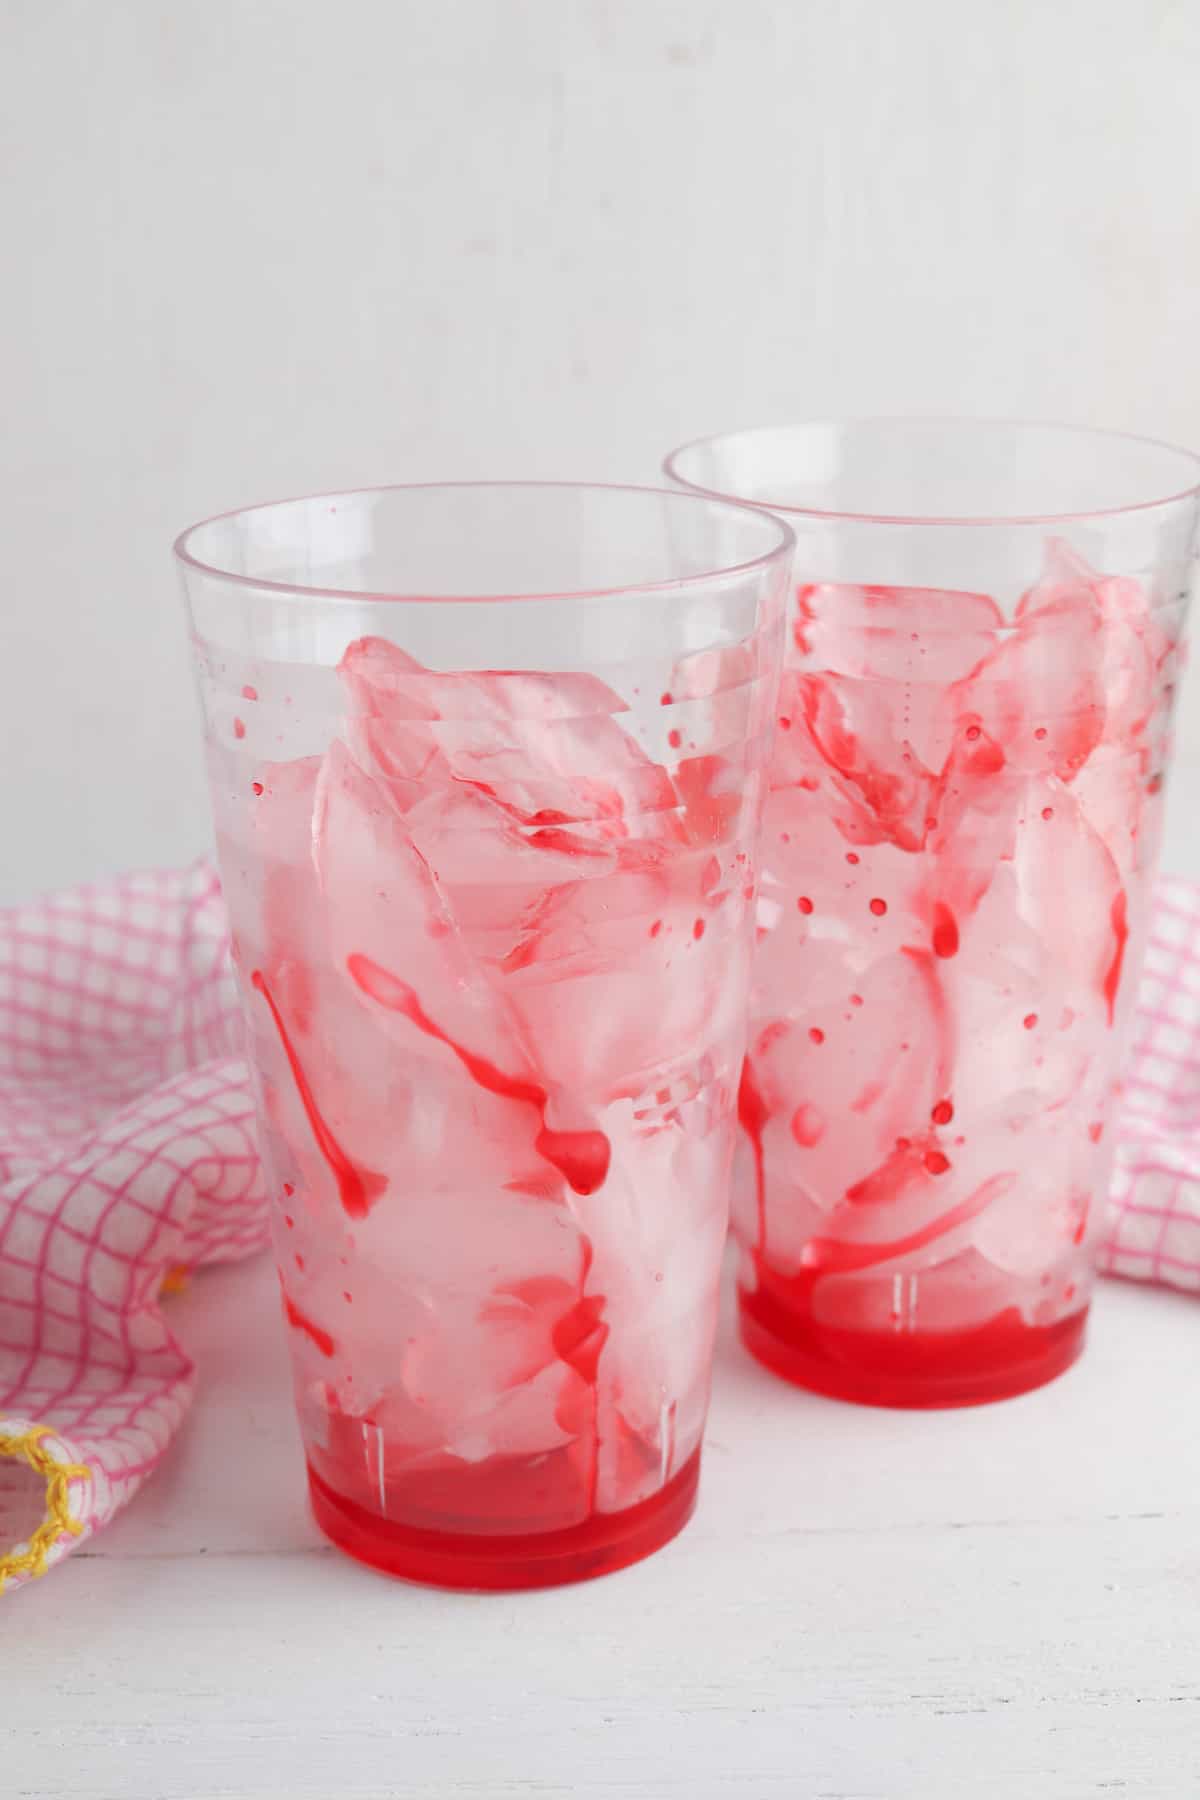 Red syrup over ice in glass.